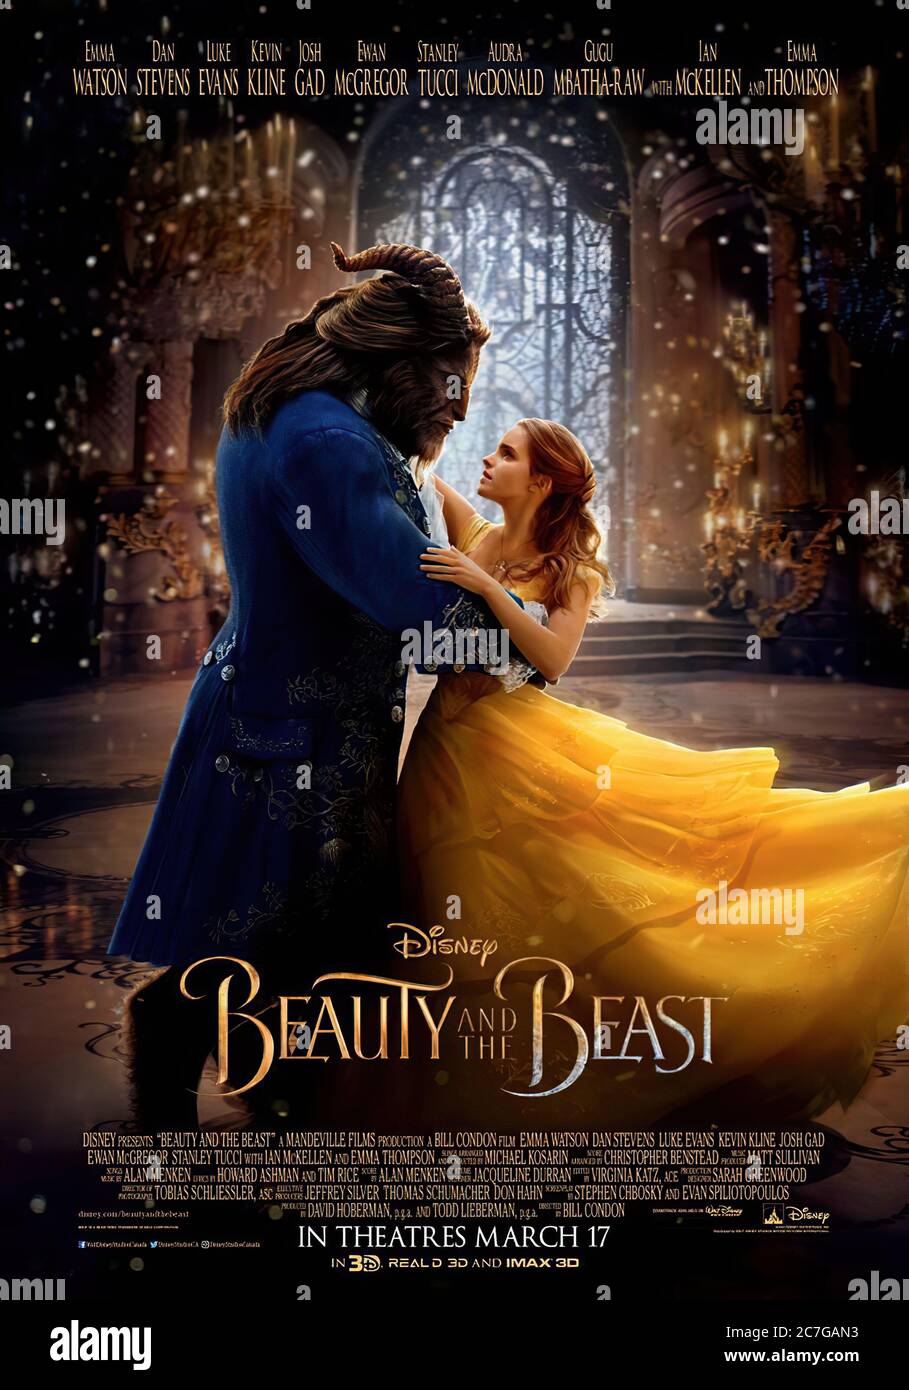 Beauty and the Beast - Poster di film Foto Stock